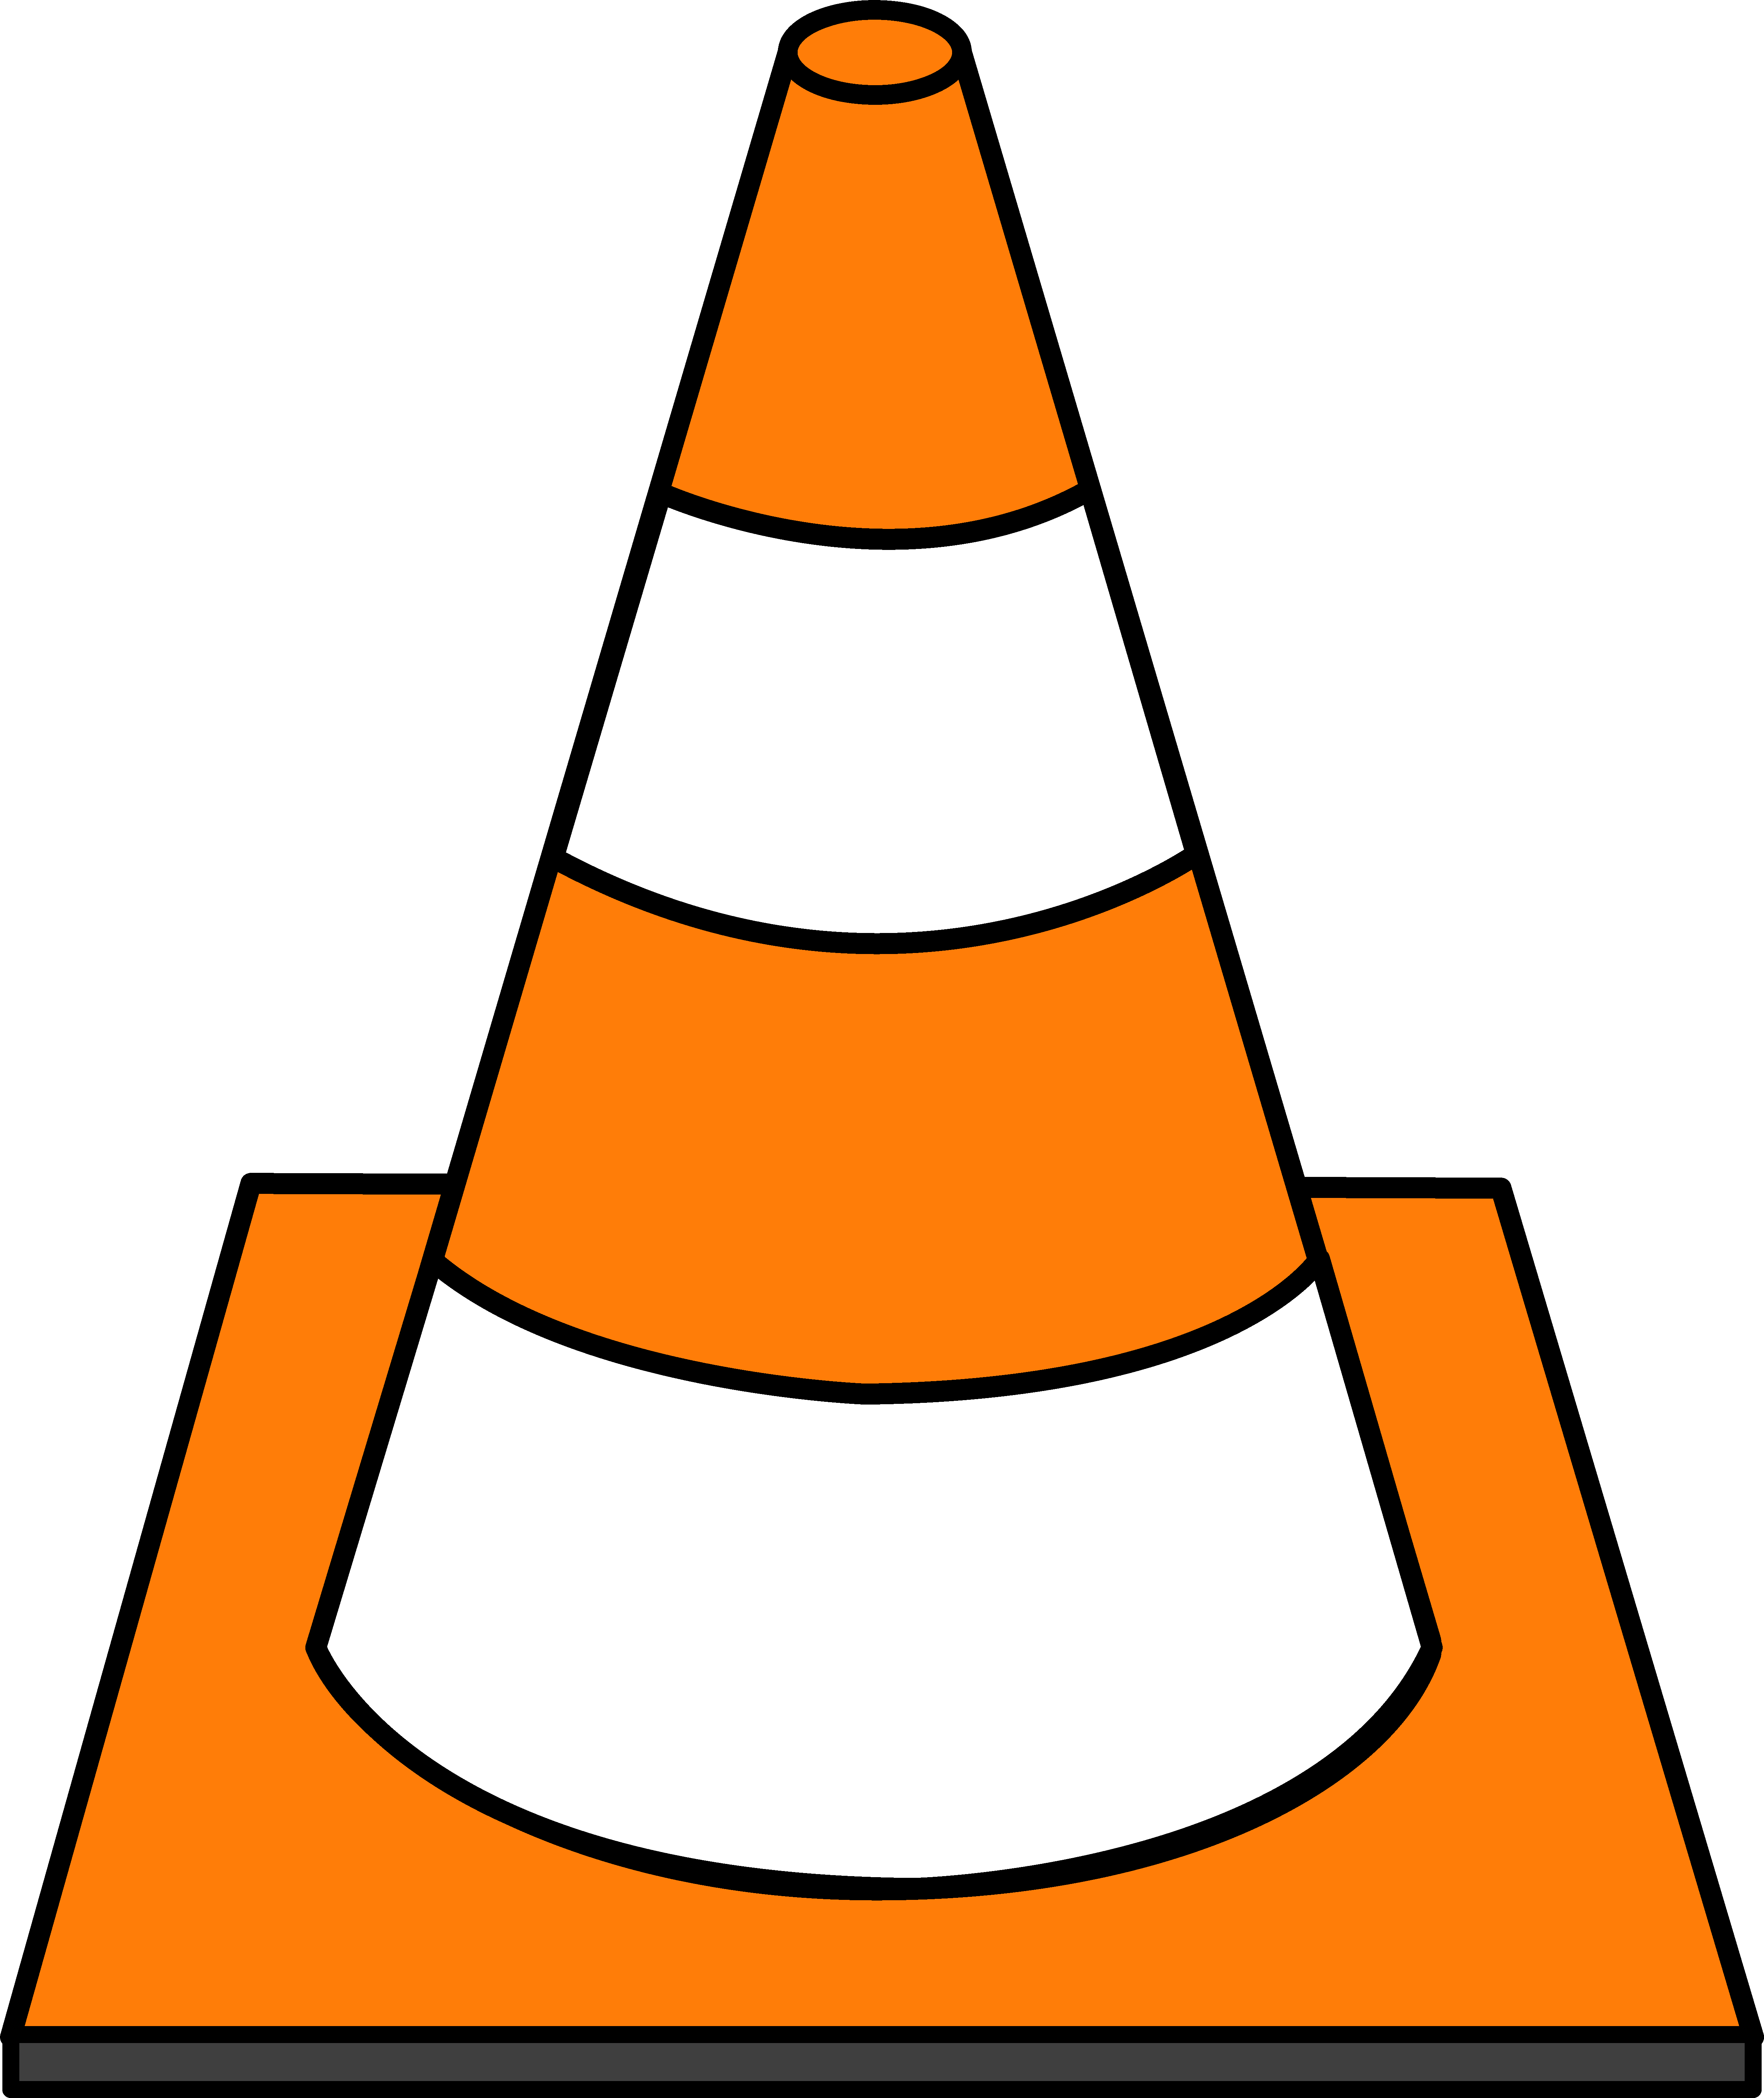 Trail clipart highway. Striped road cone under